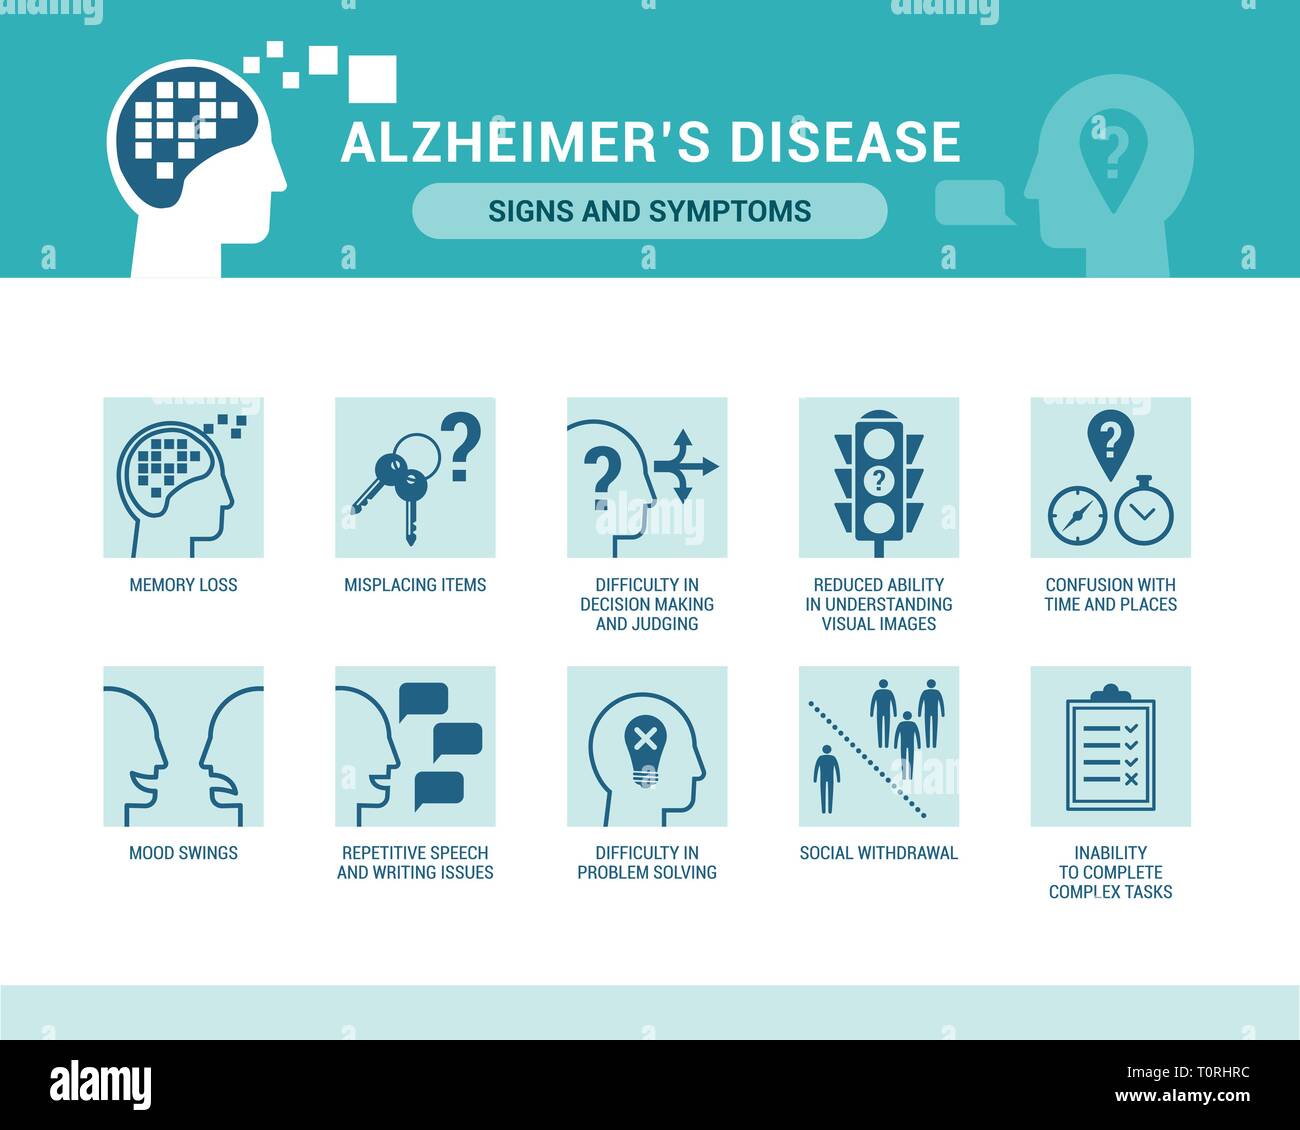 Alzheimer's disease and dementia signs and symptoms, senior care and neurodegenerative diseases concept Stock Vector